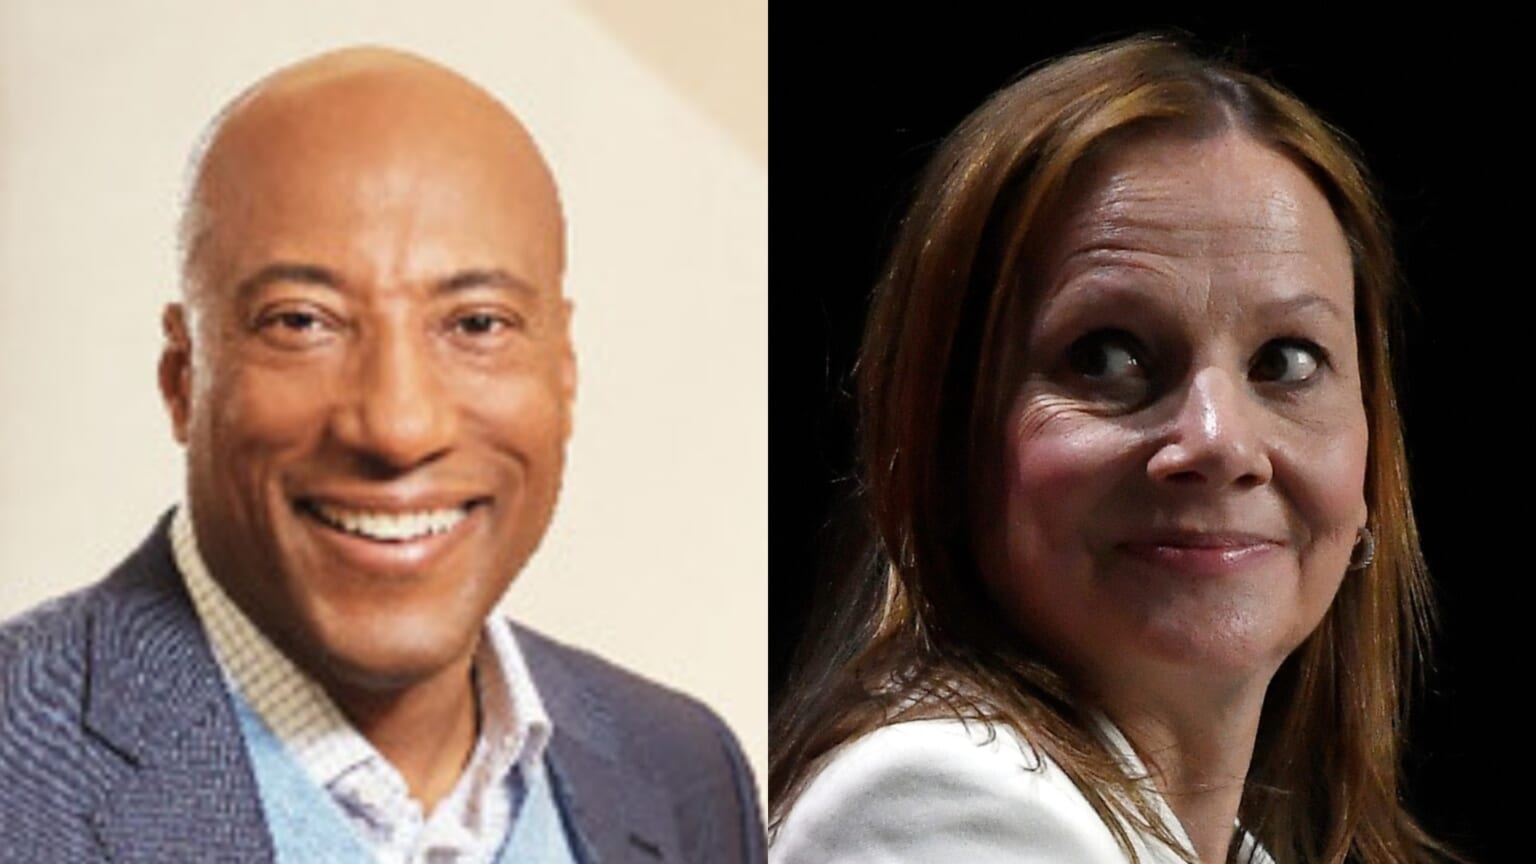 Byron Allen buys full-page ad blasting GM CEO Mary Barra as racist